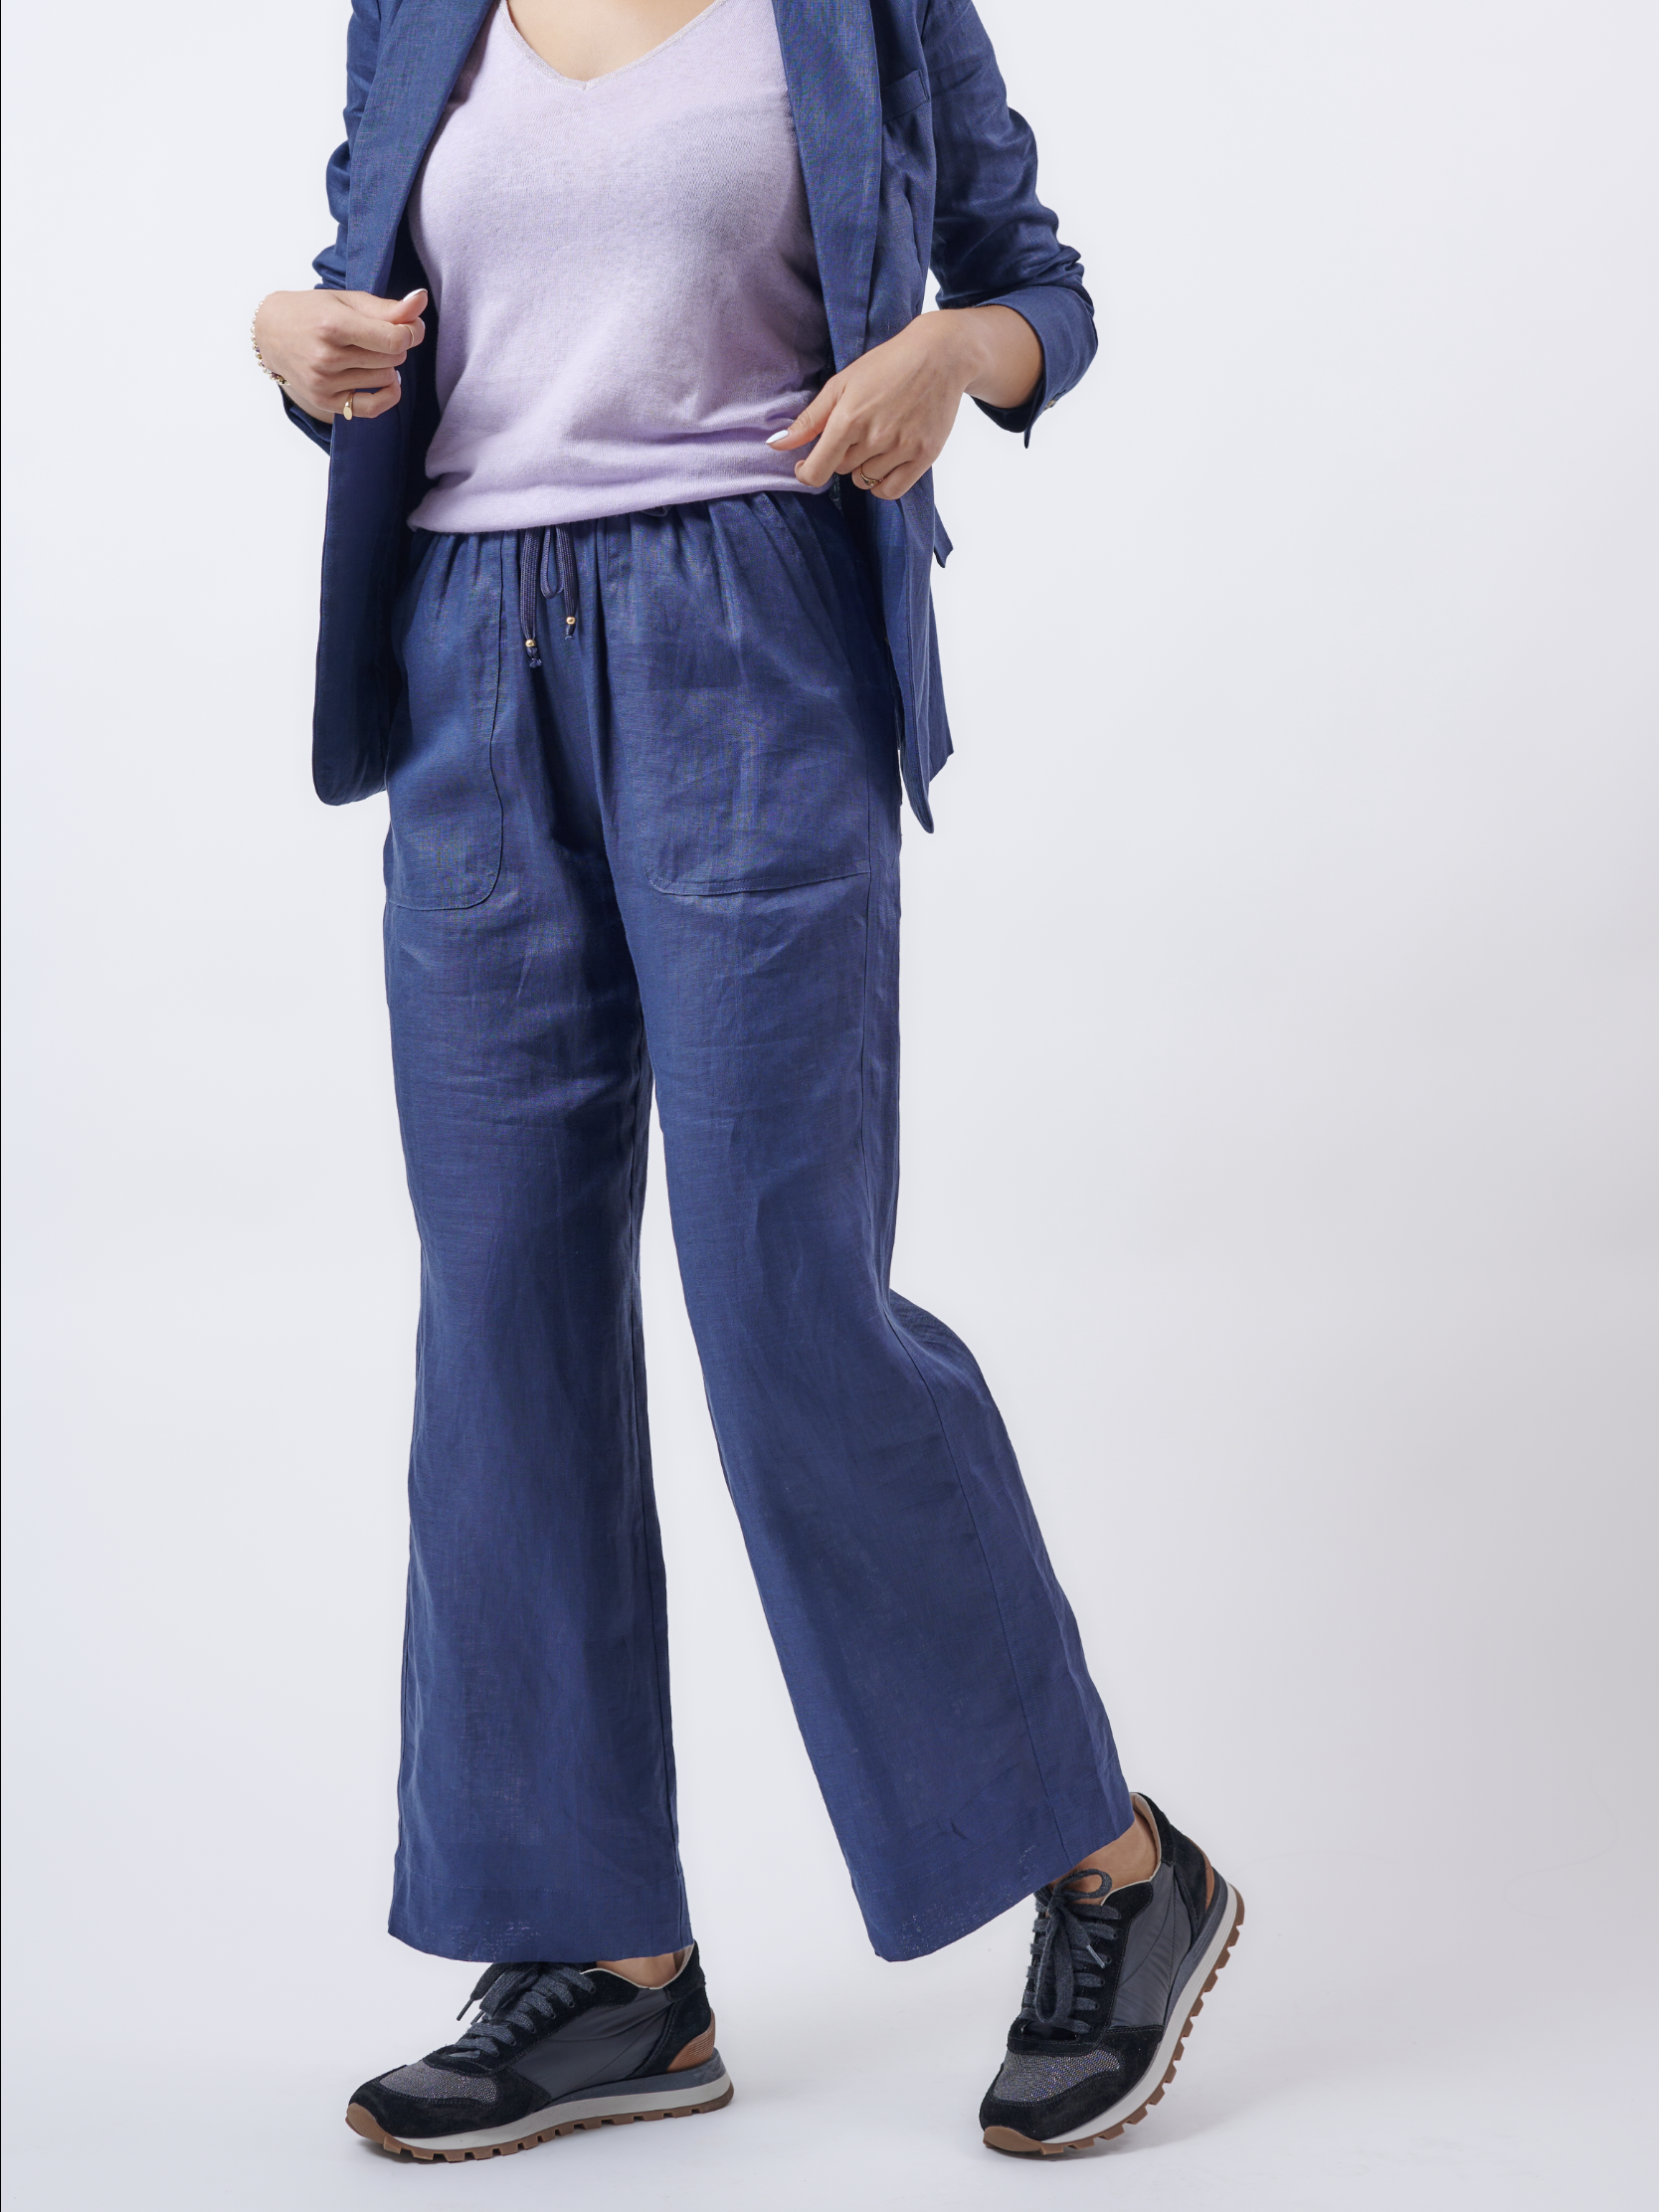 Elevate Your Look: SOFIA Linen Pants in Navy Blue